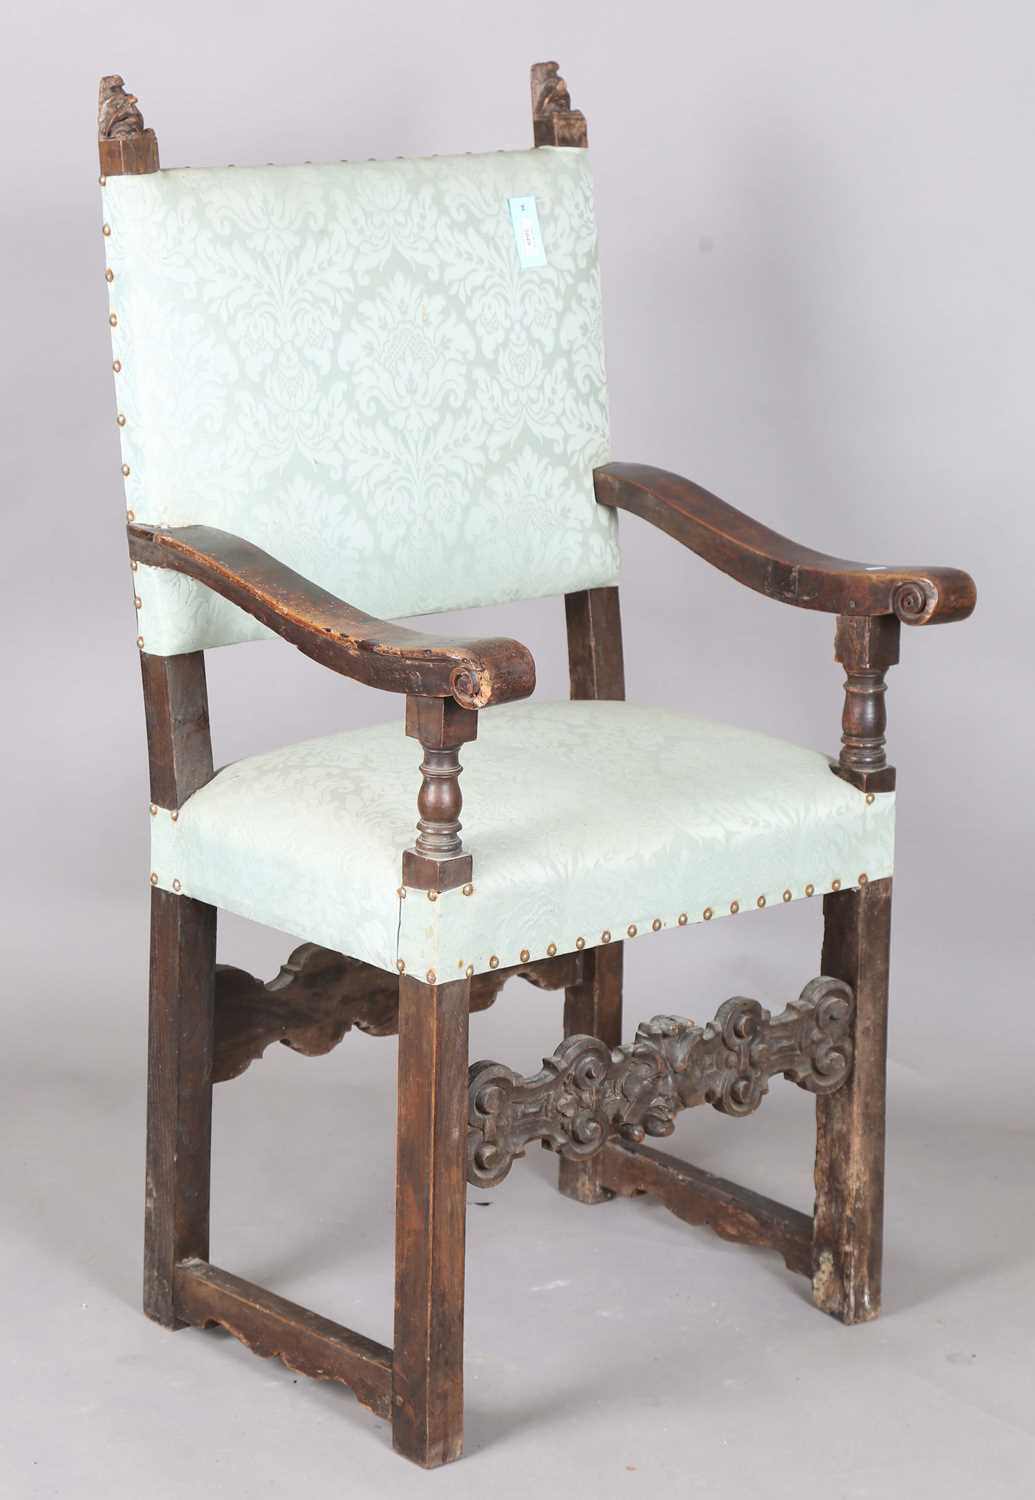 A late 17th century Continental walnut armchair, the finials carved with masks, the two front legs